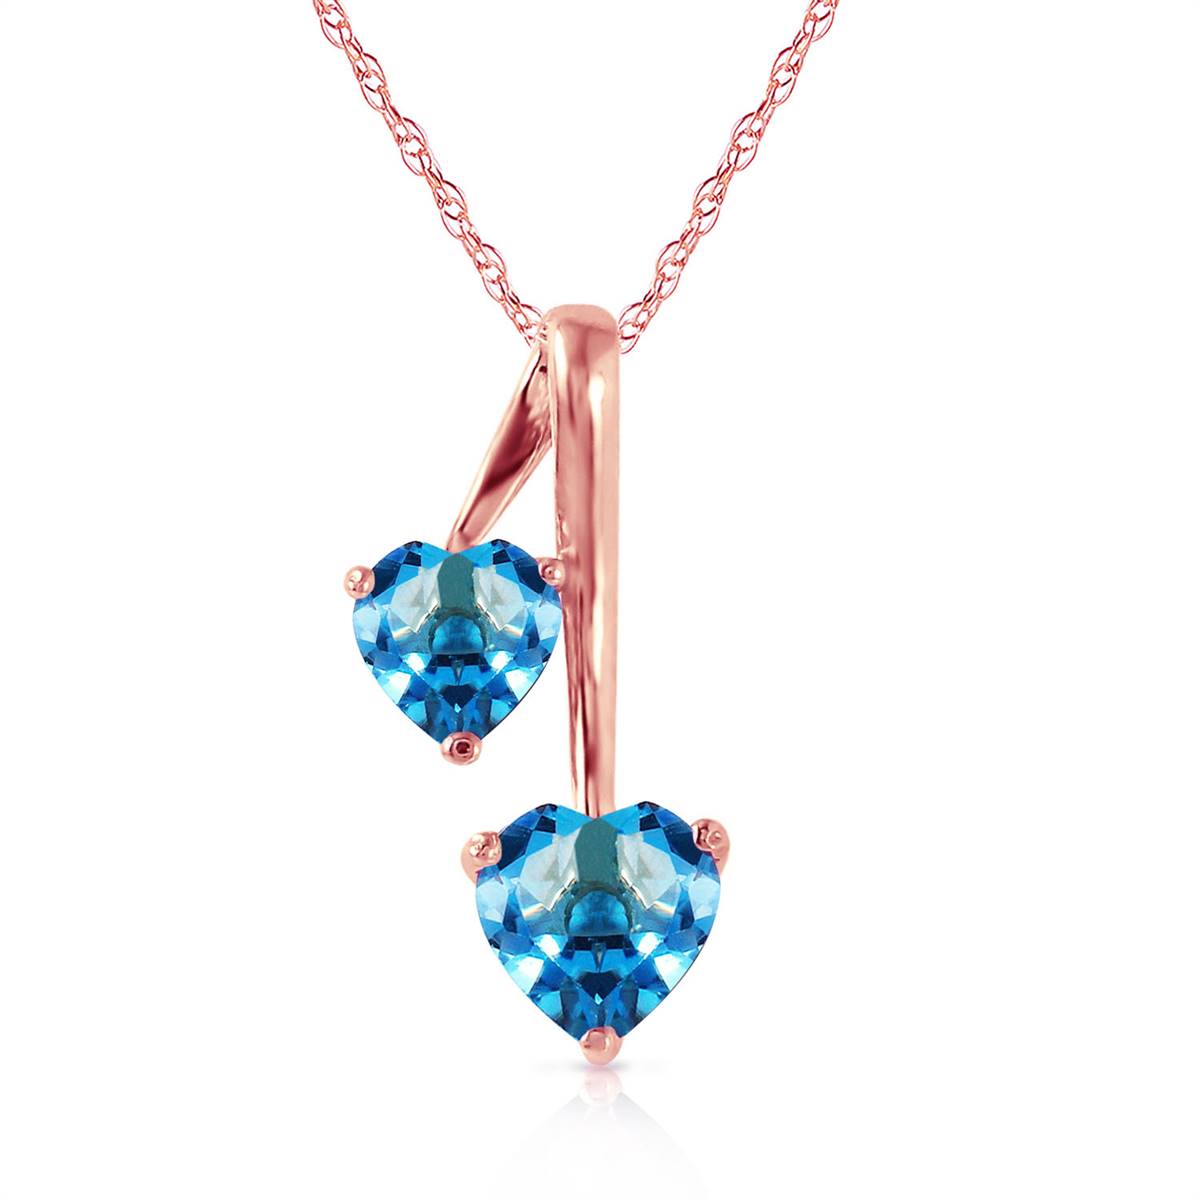 14K Solid Rose Gold Hearts Necklace w/ Natural Blue Topaz & Peridot